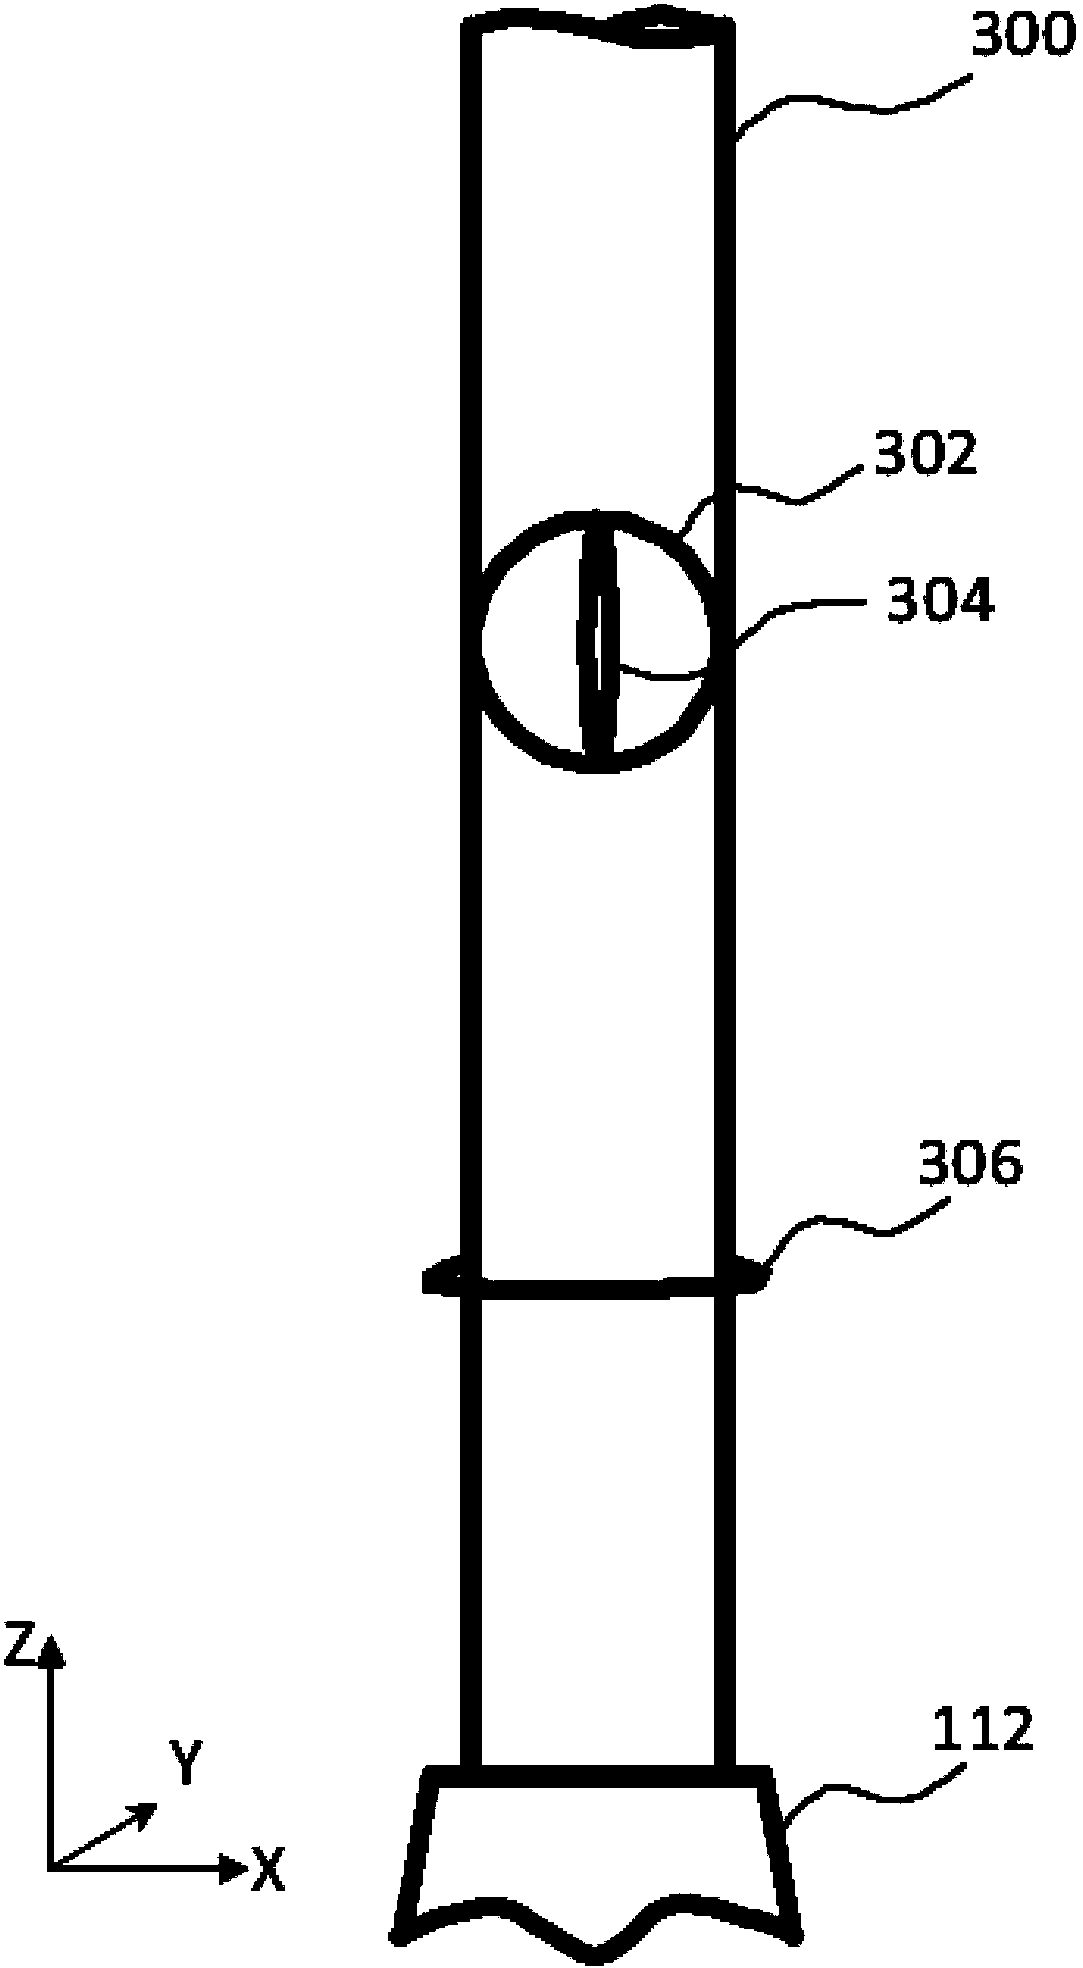 Method for detecting bed boundary